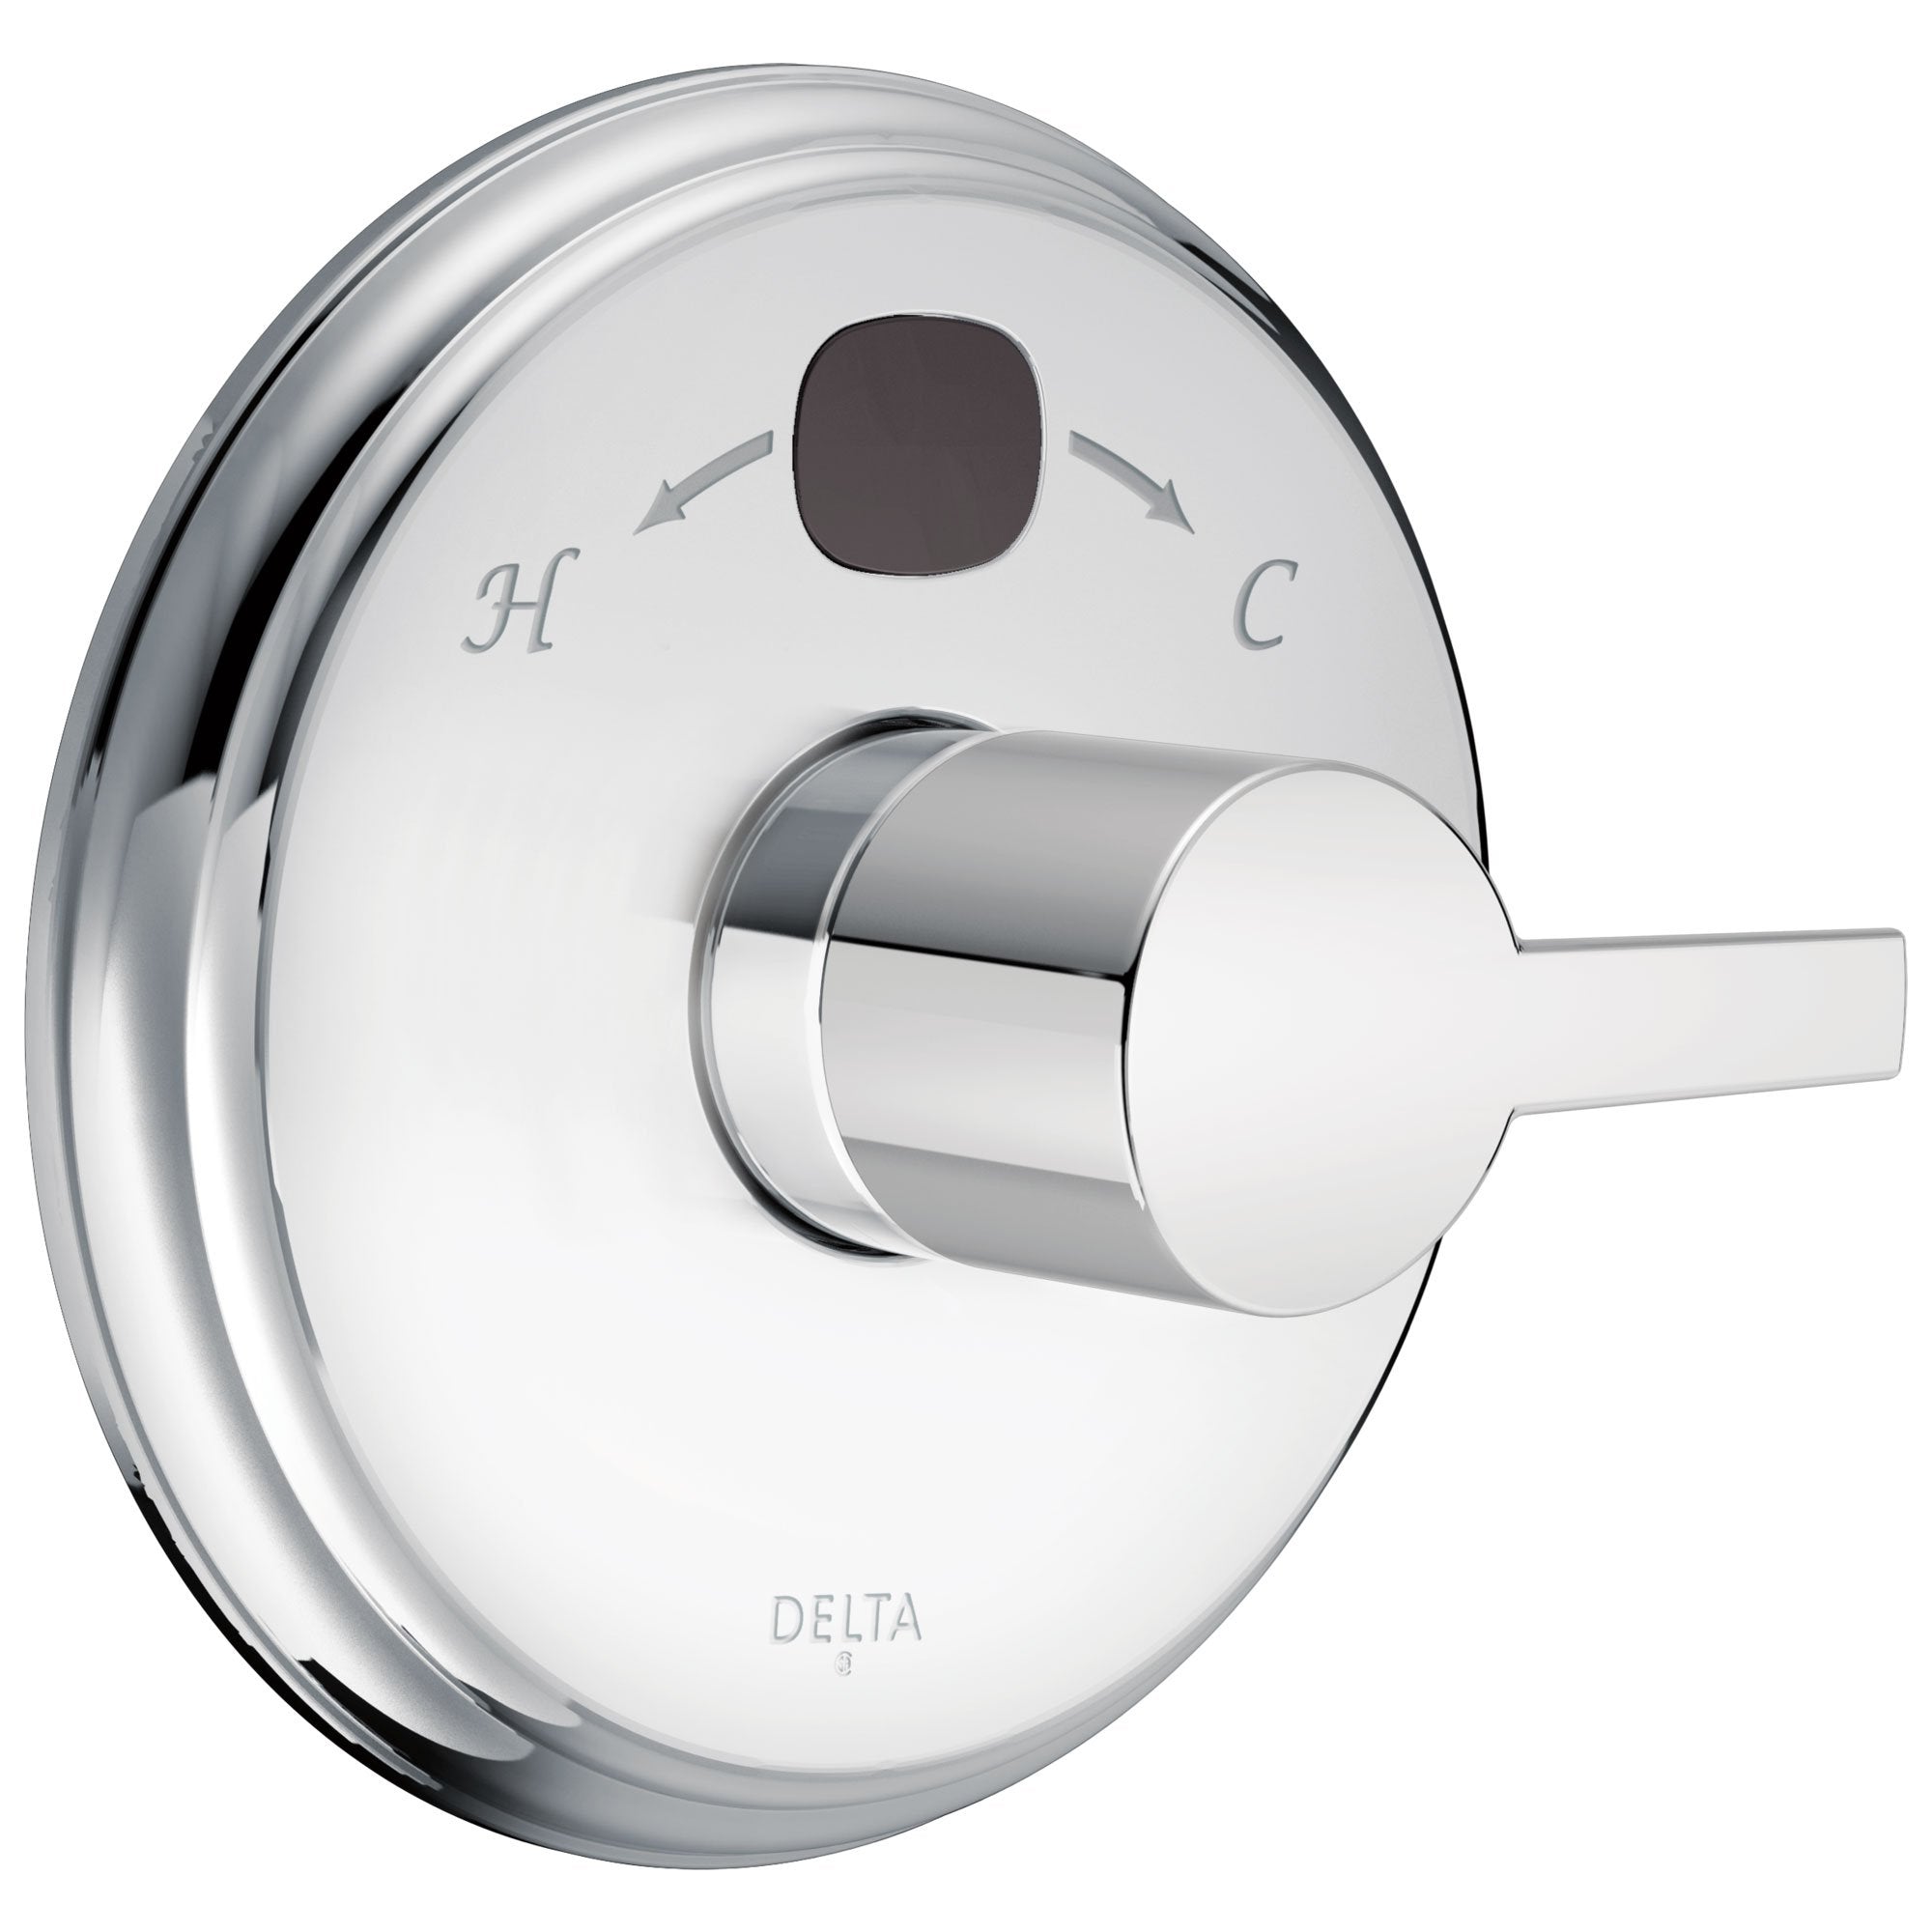 Delta Chrome Finish Compel Collection 14 Series Digital Display Temp2O Shower Valve Control COMPLETE with Single Lever Handle and Valve without Stops D1644V